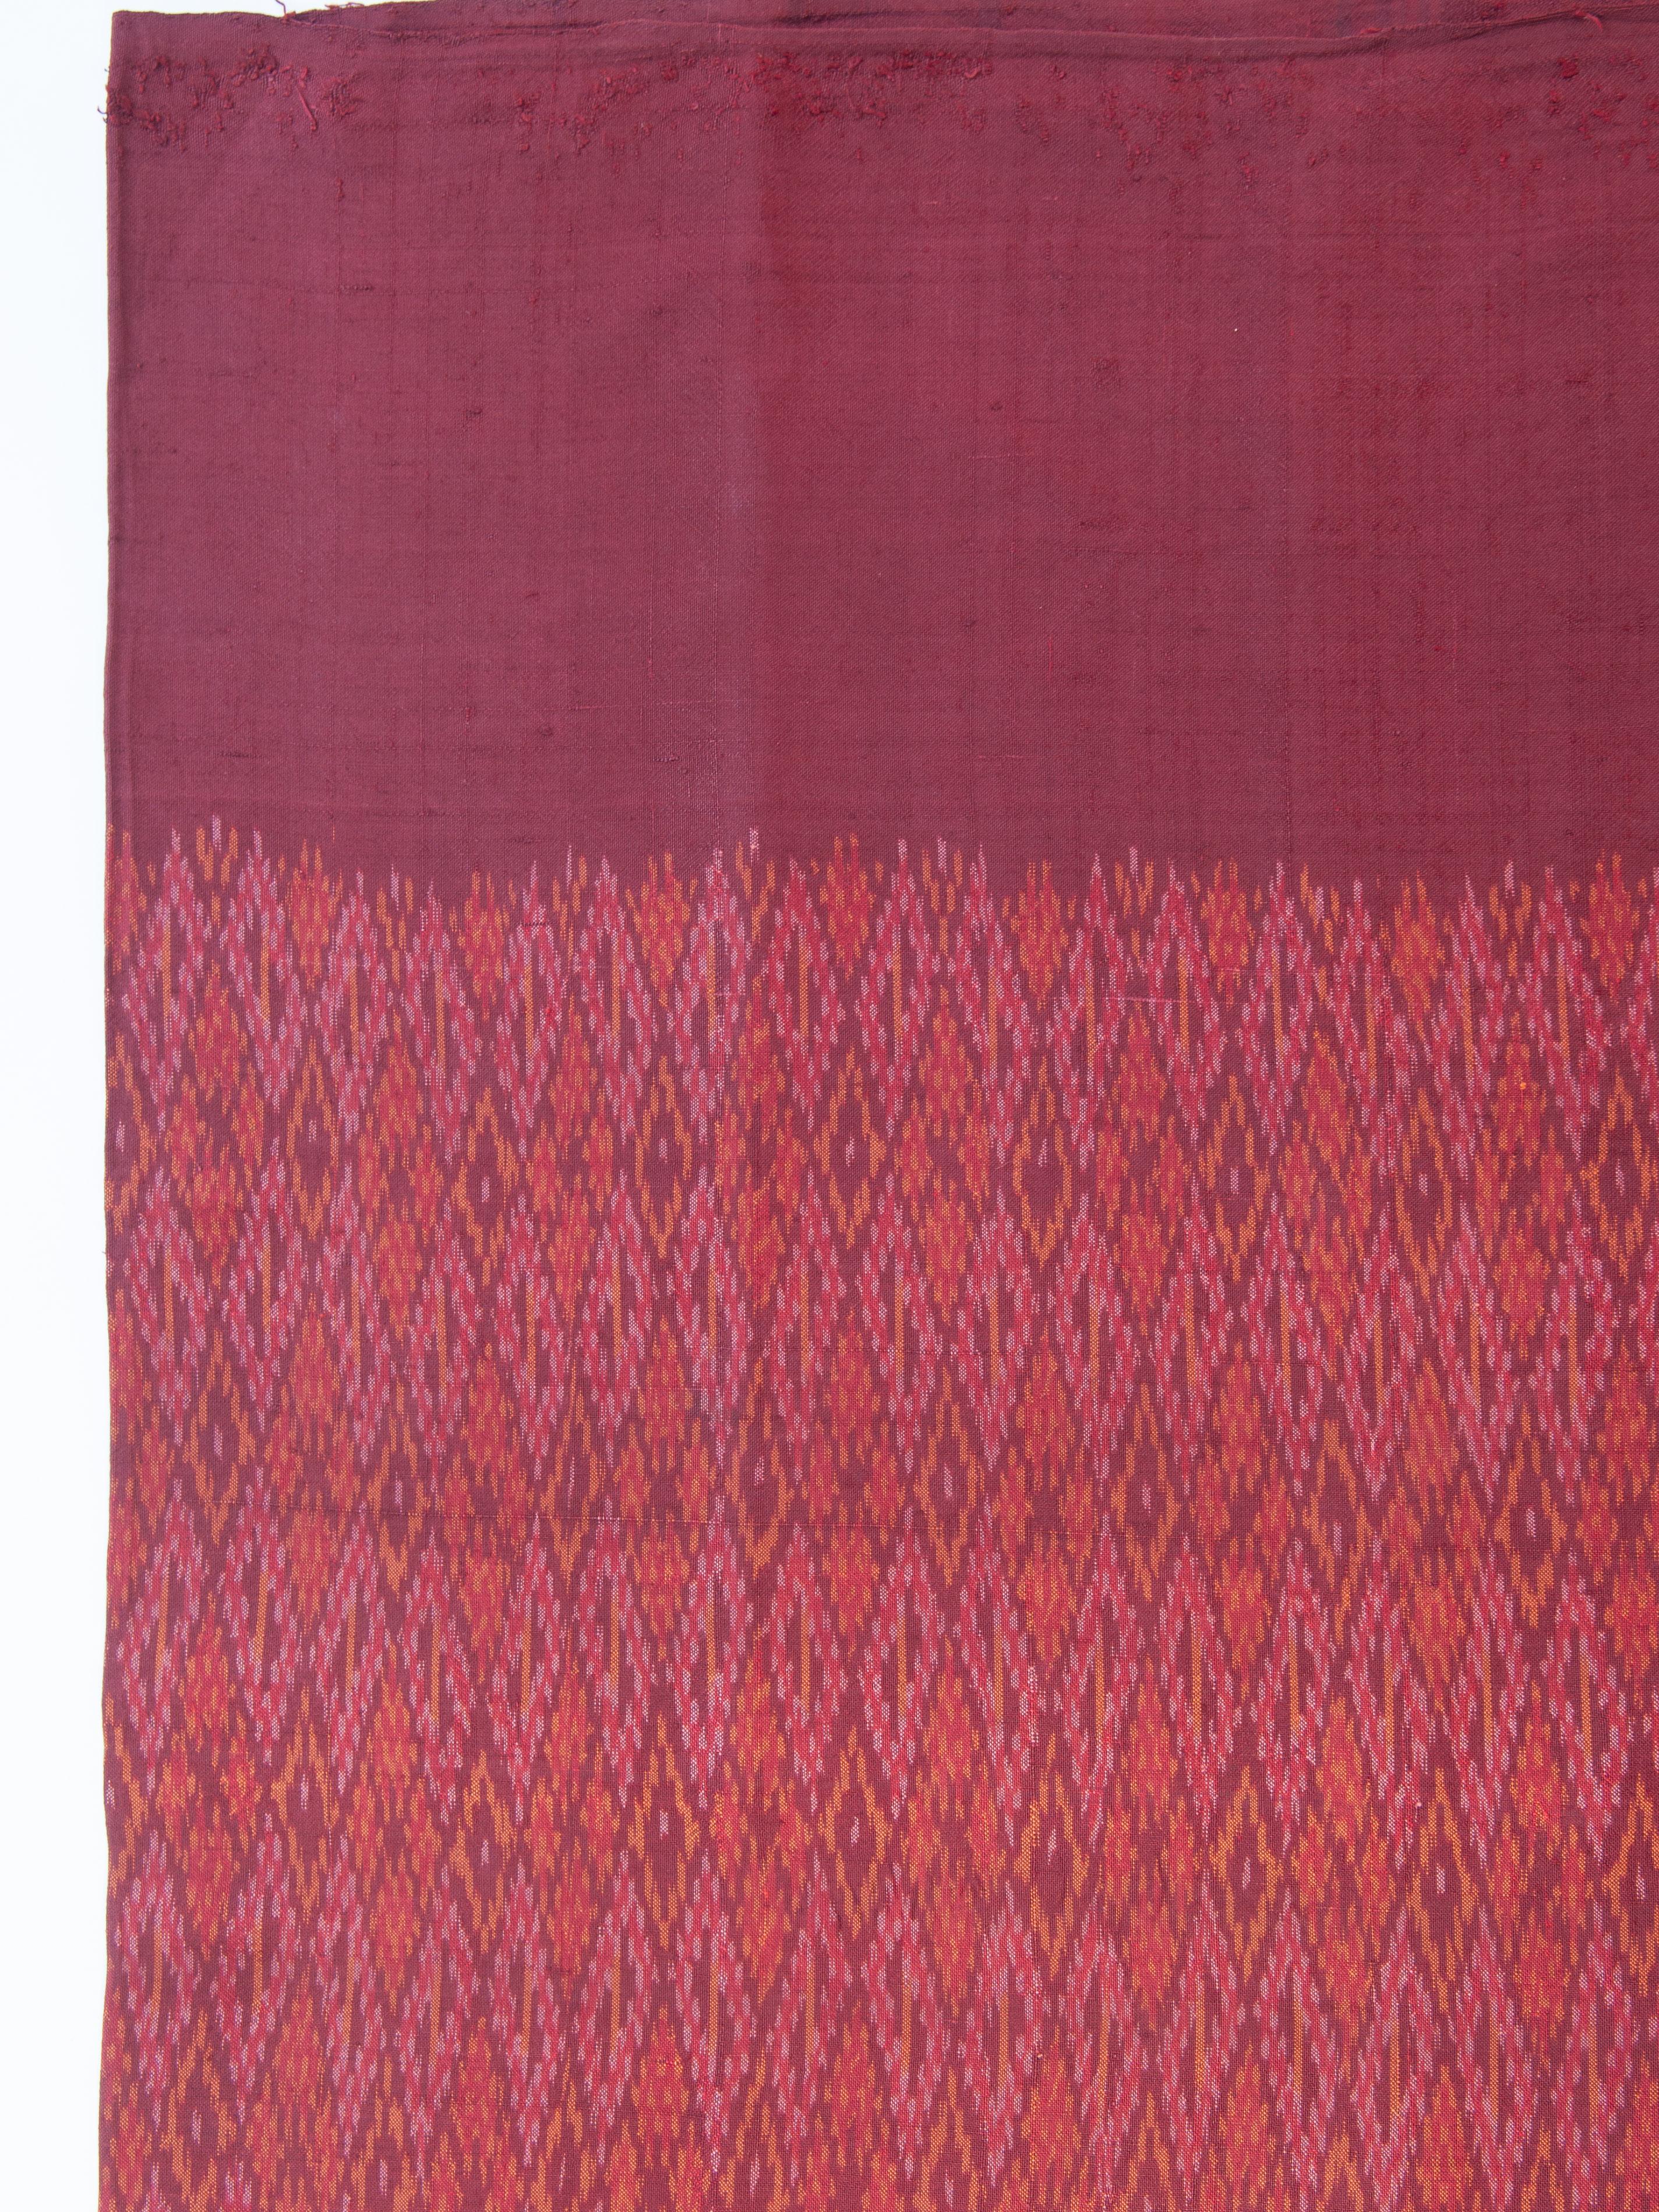 Hand-Woven Vintage Silk Ikat Sarong from Northeast Thailand or Cambodia, Mid-20th Century